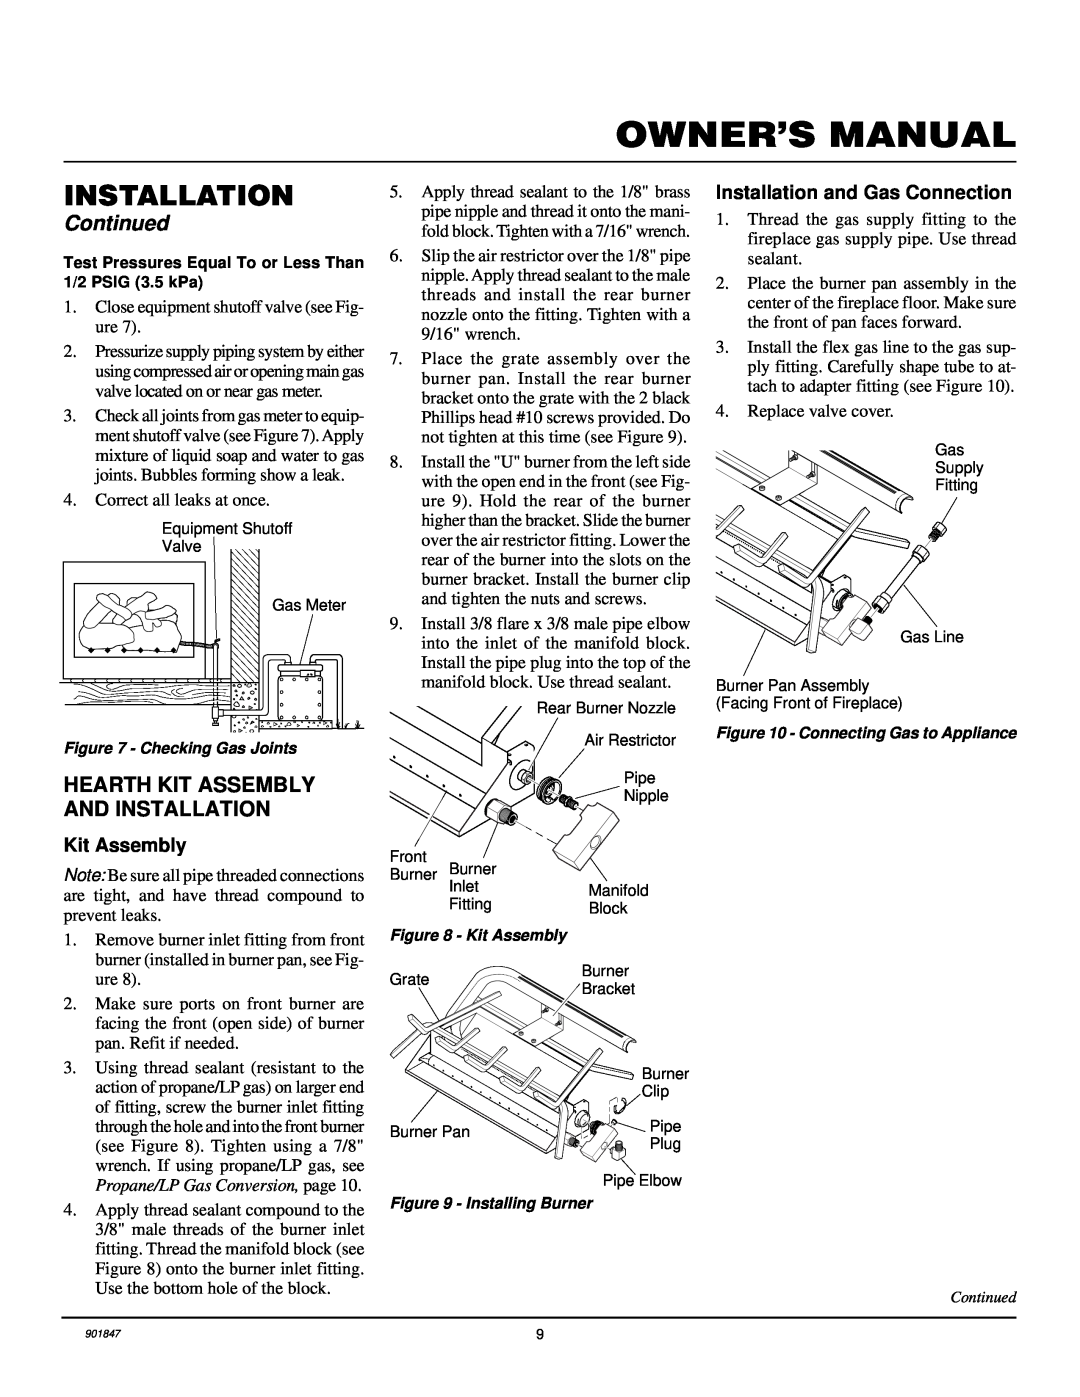 Desa VVTR18, VVTR24 Owner’S Manual, Continued, Hearth Kit Assembly And Installation, Installation and Gas Connection 